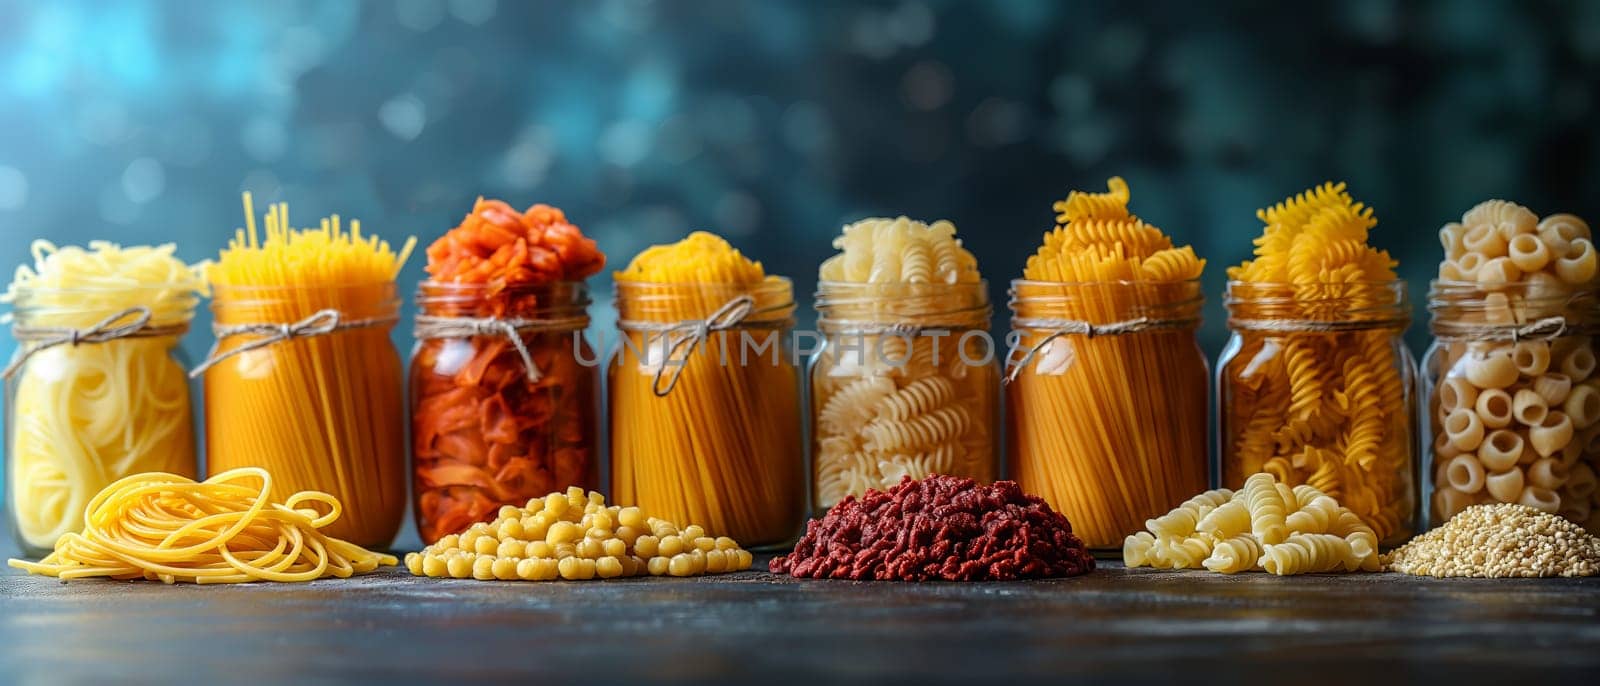 Food background with spaghetti recipe ingredient on blue texture background by Fischeron